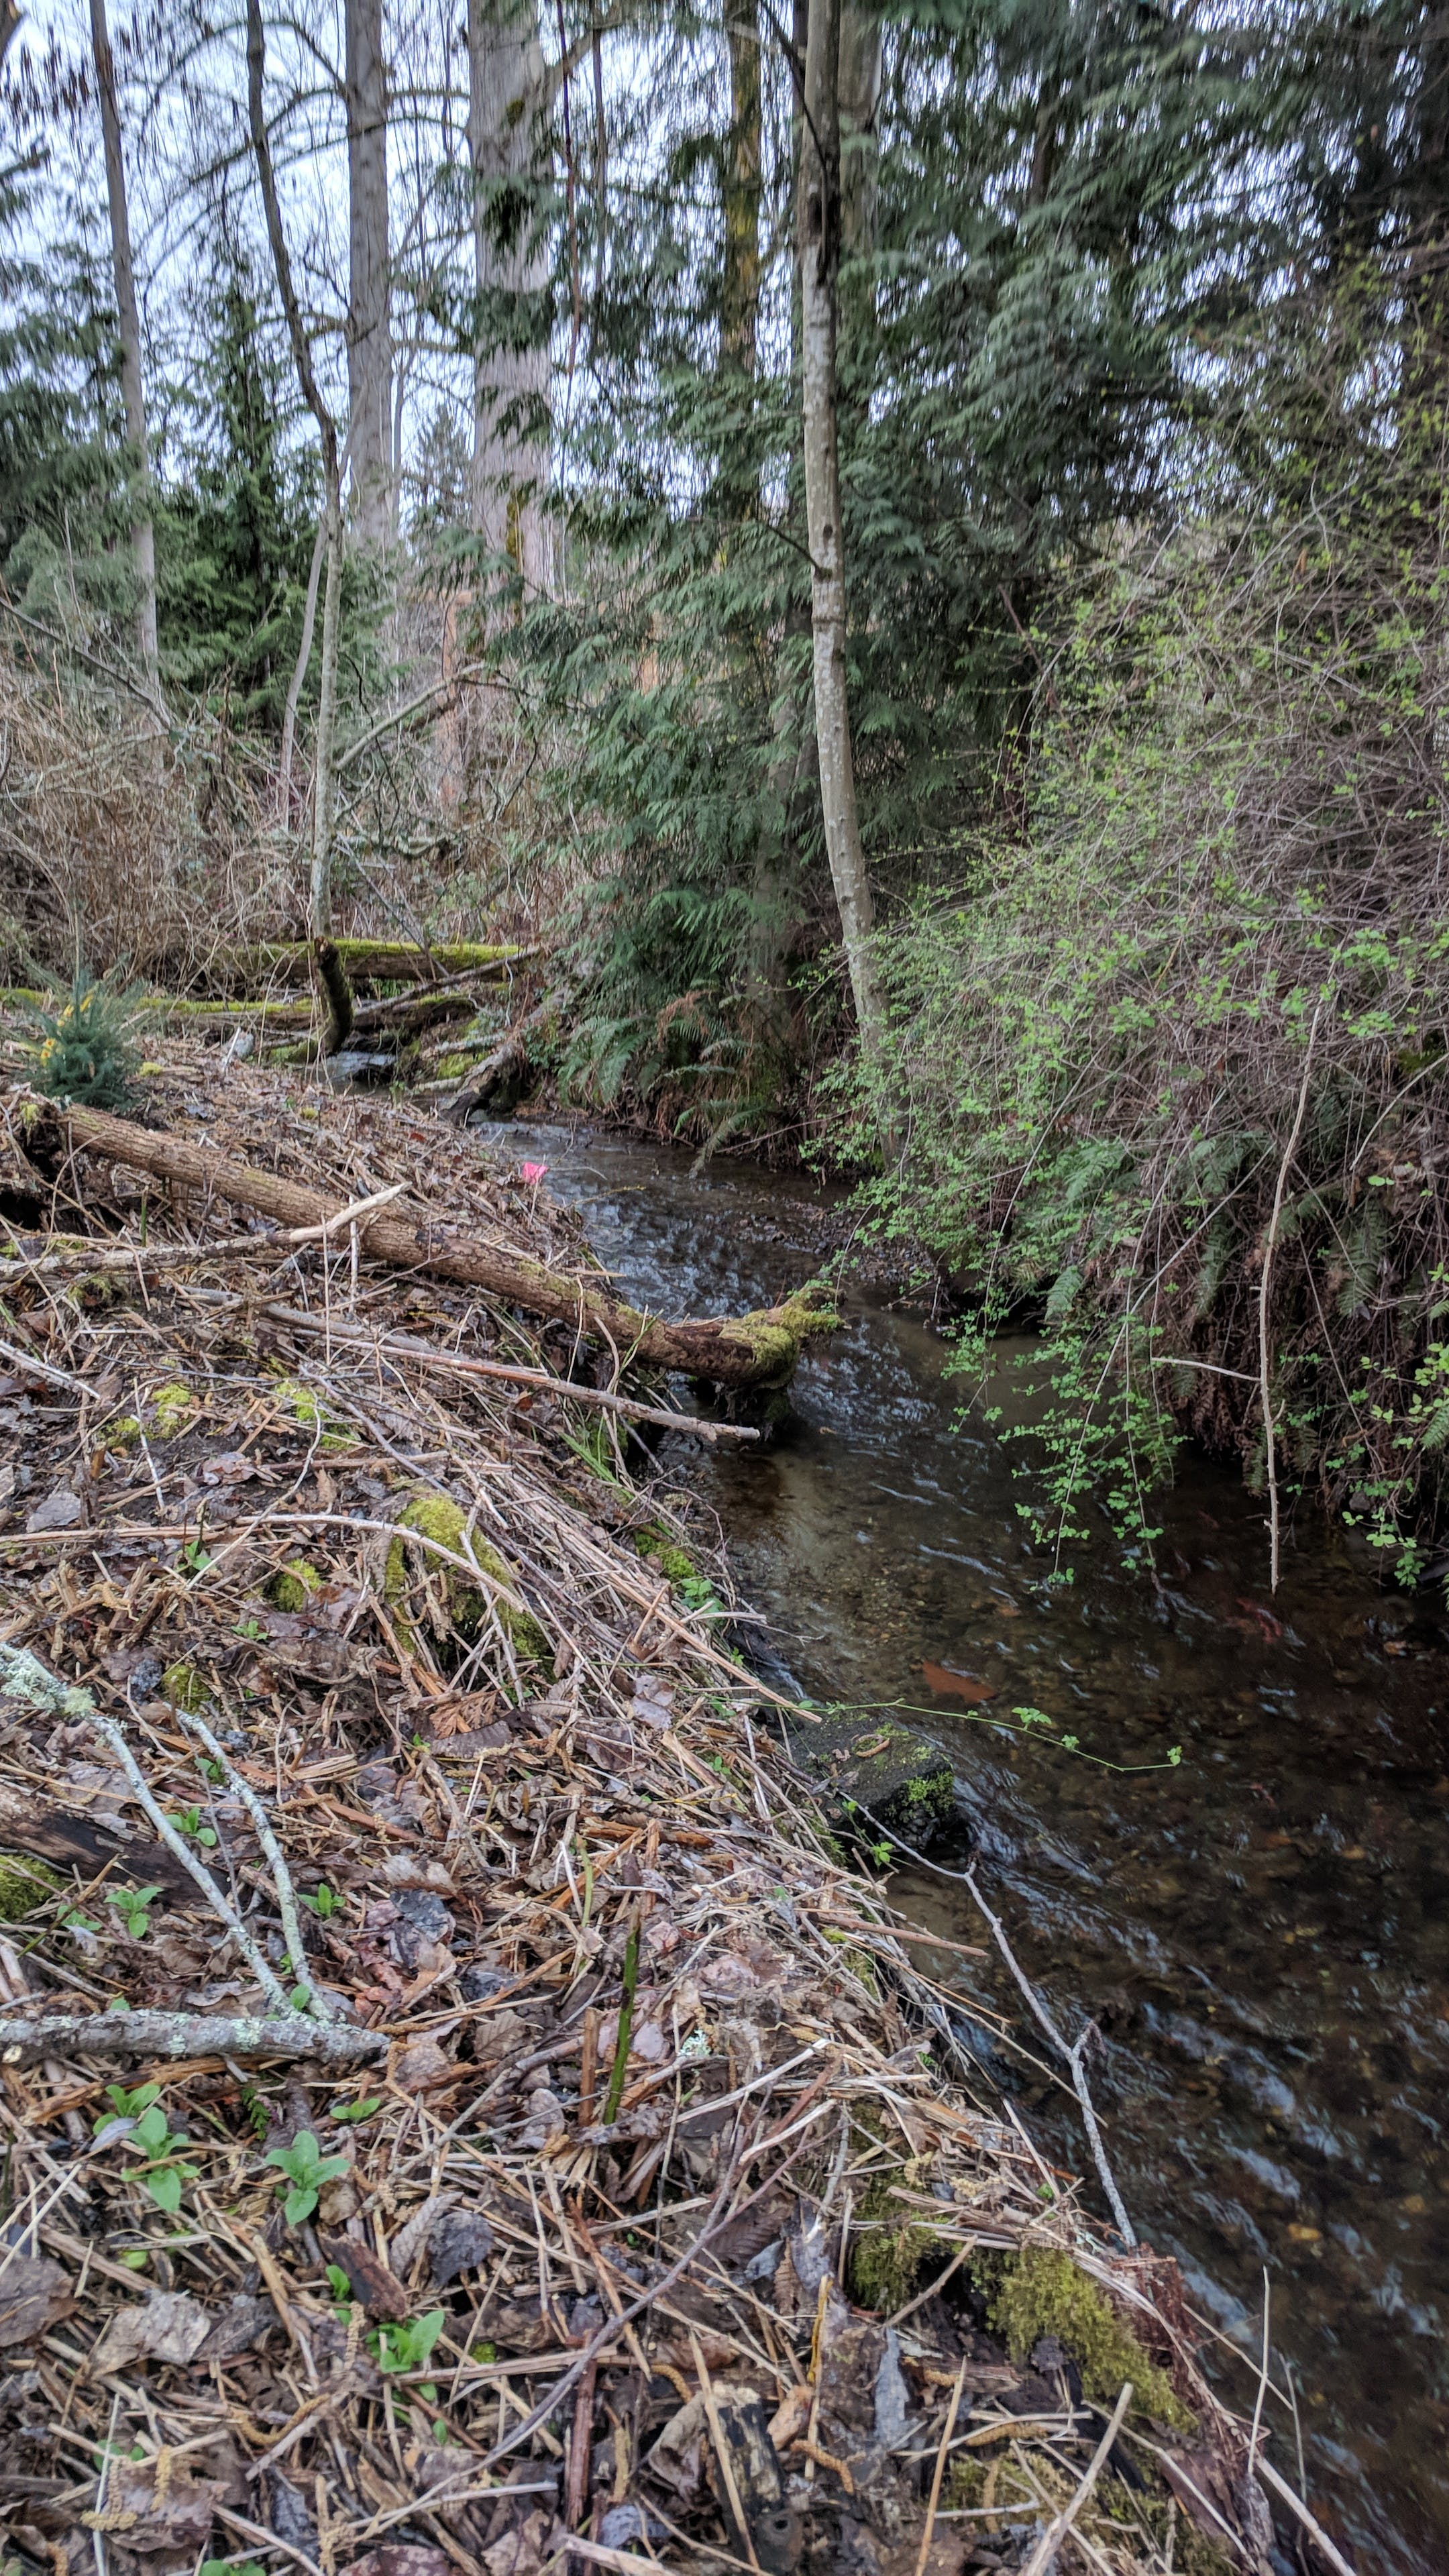 Ebright Creek banks north of East Lake Sammamish Parkway in wooded area full of vegetation, brambles, and fallen trees.